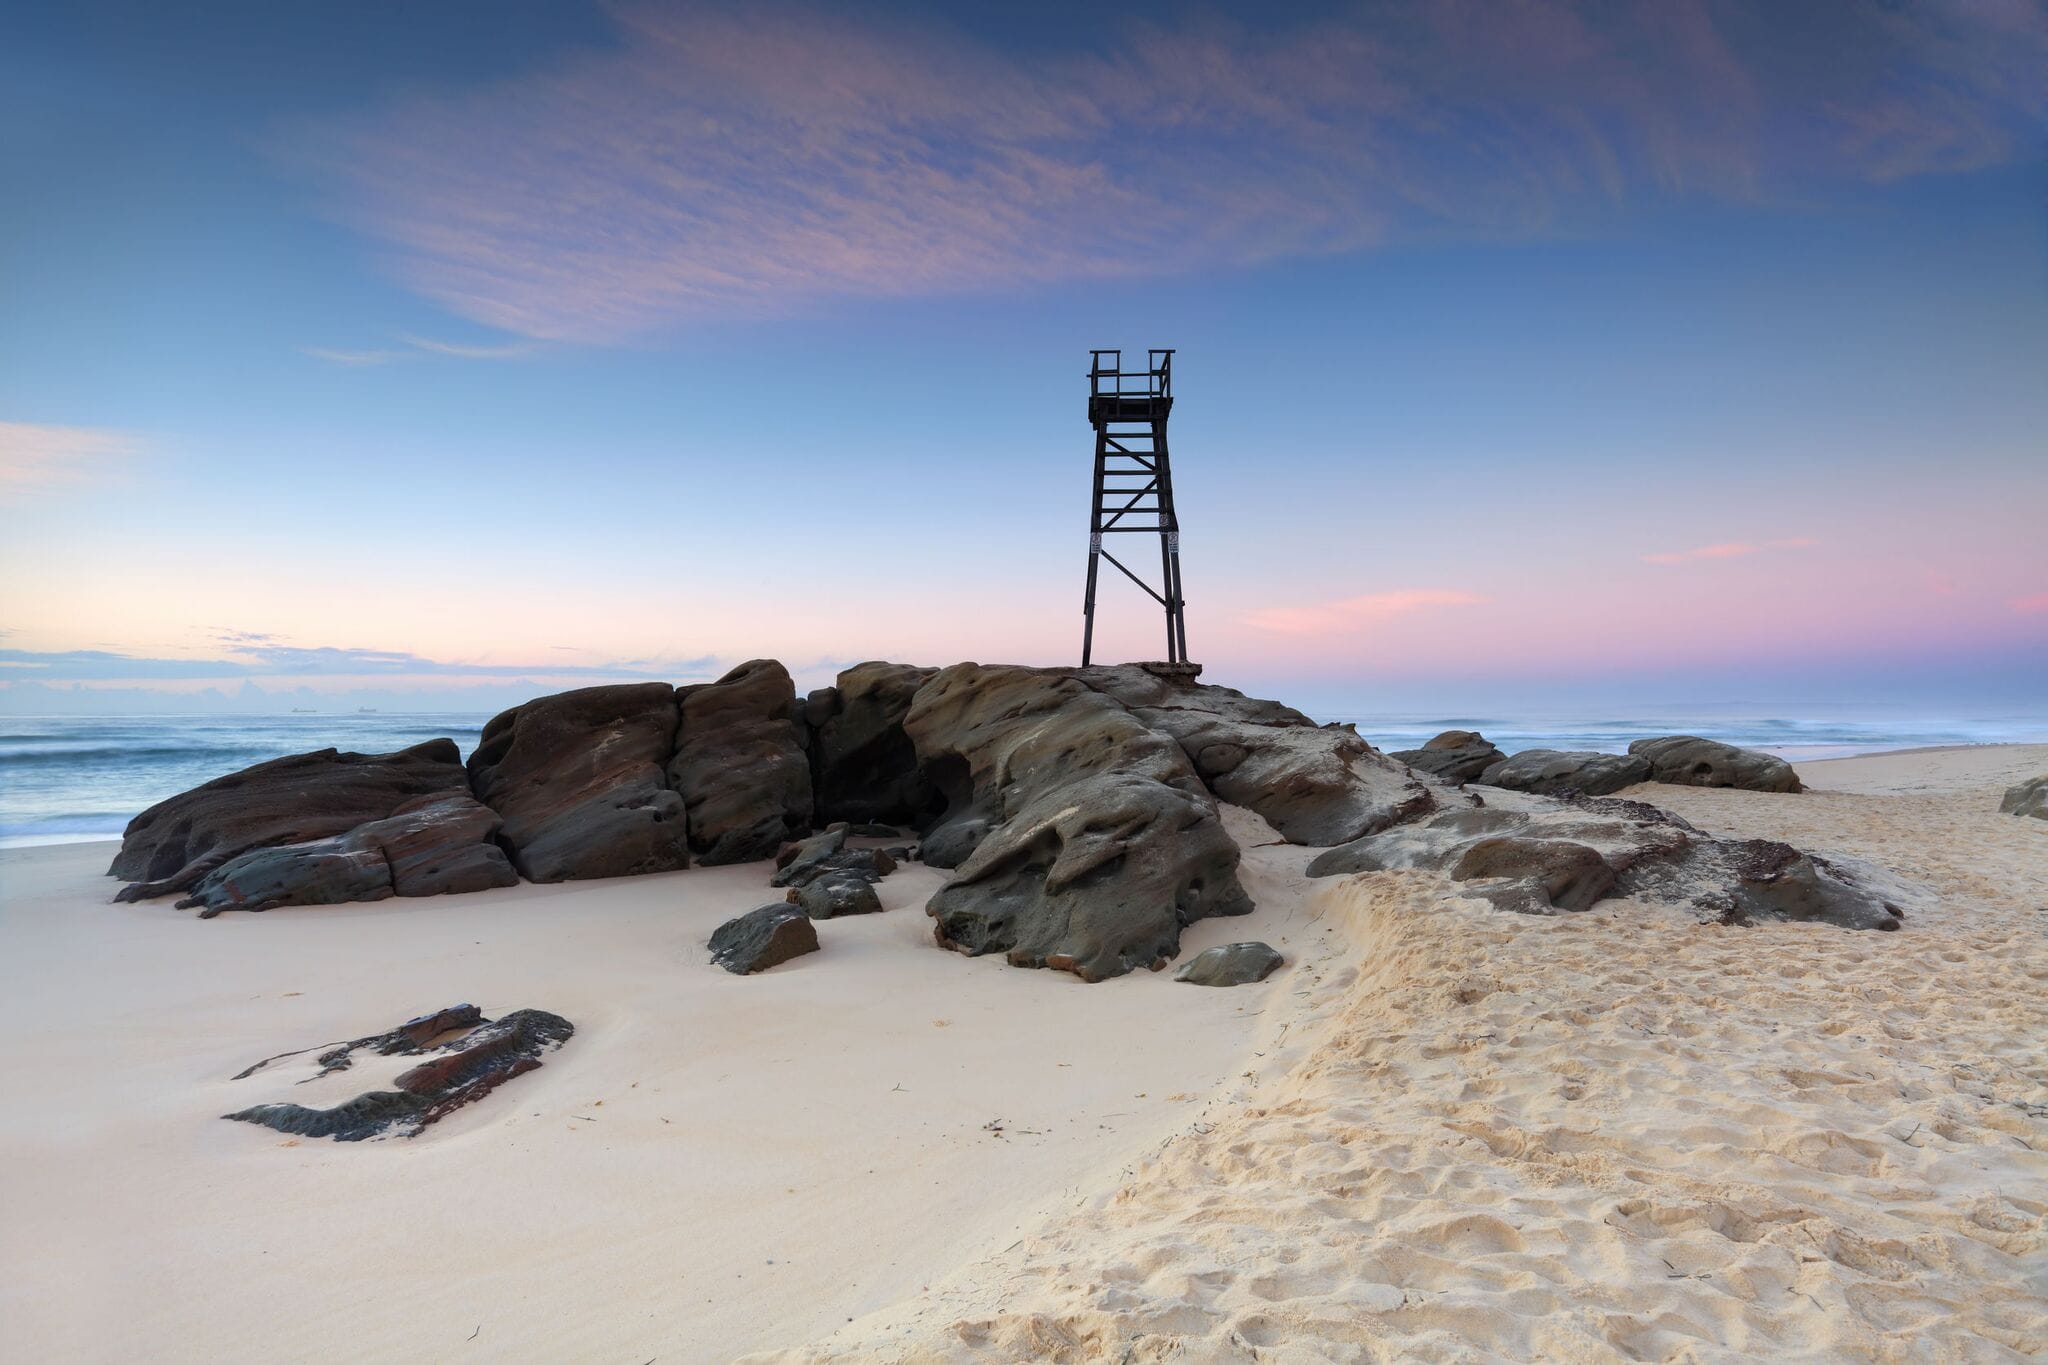 Redhead beach with large dark rocks, sand, a tower and pastel pink, blue and purple coloured sky with waves in background